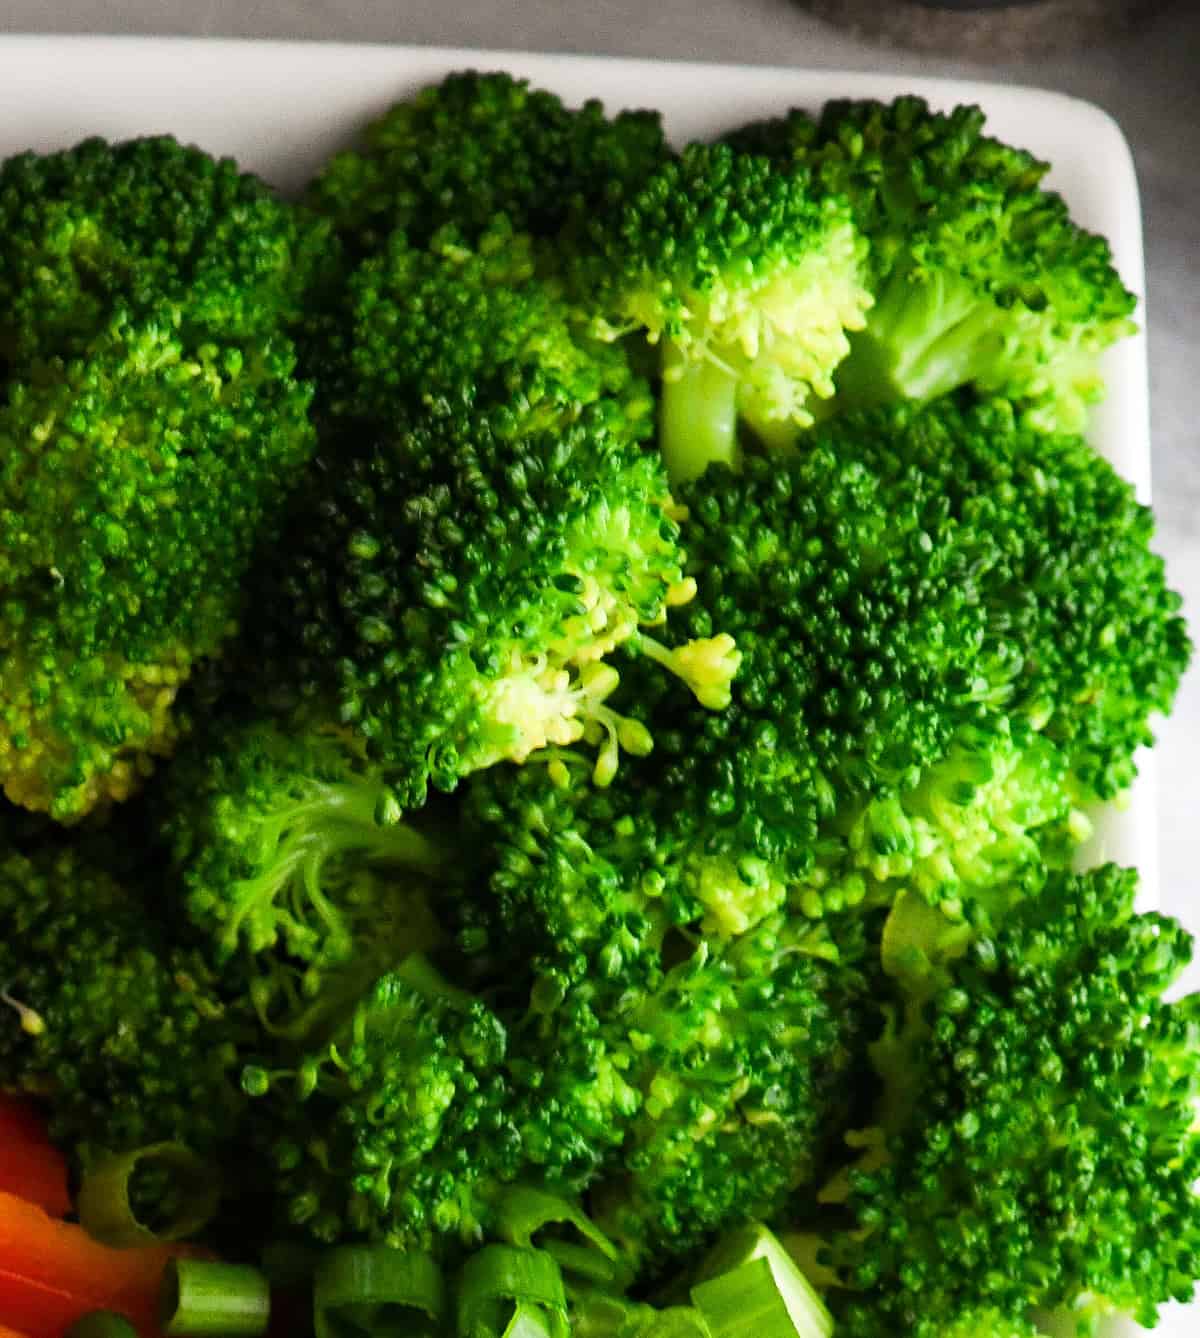 blanched broccoli on a plate